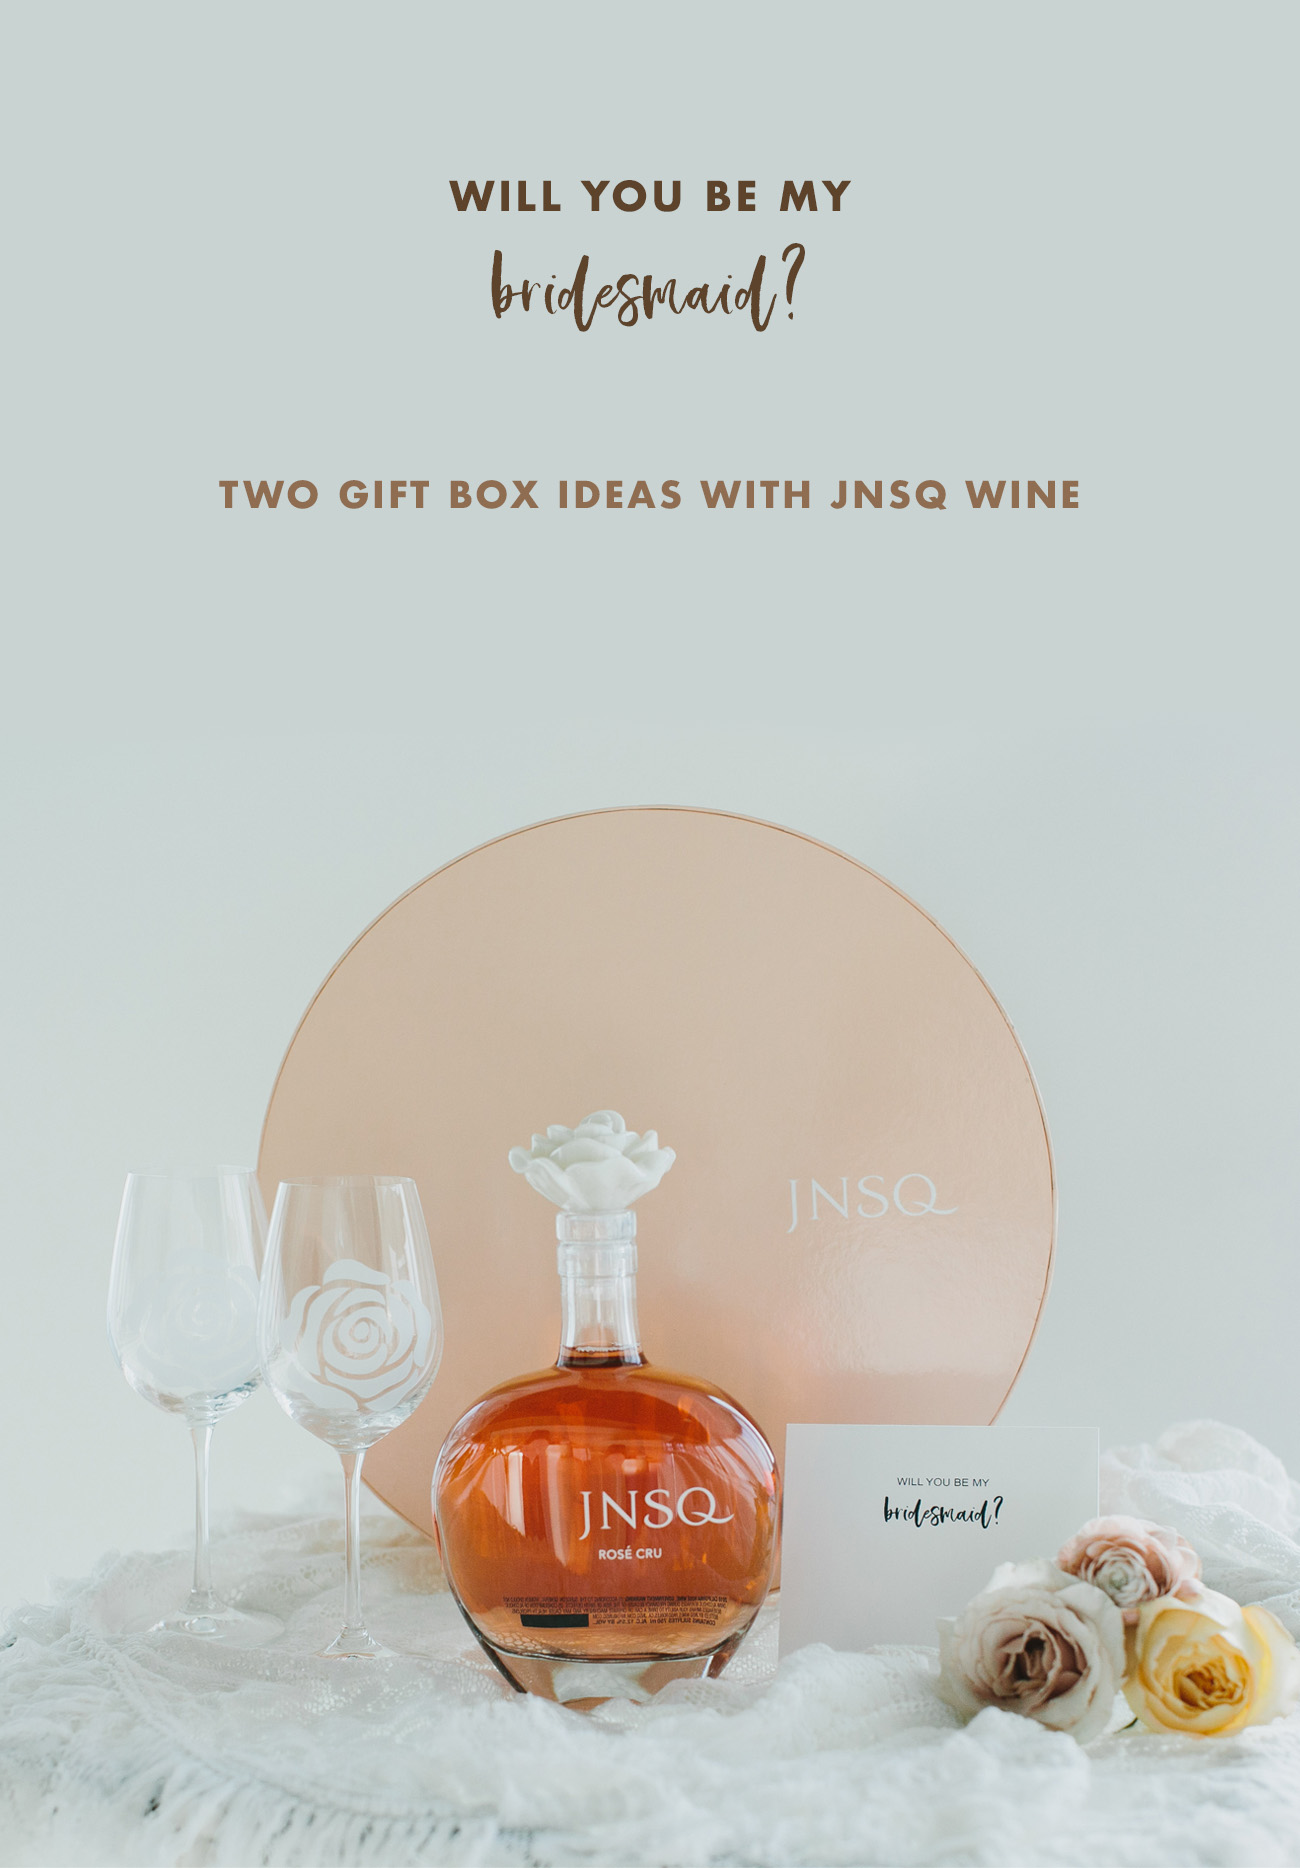 Will You Be My Bridesmaid? Gift Box with JNSQ Wine